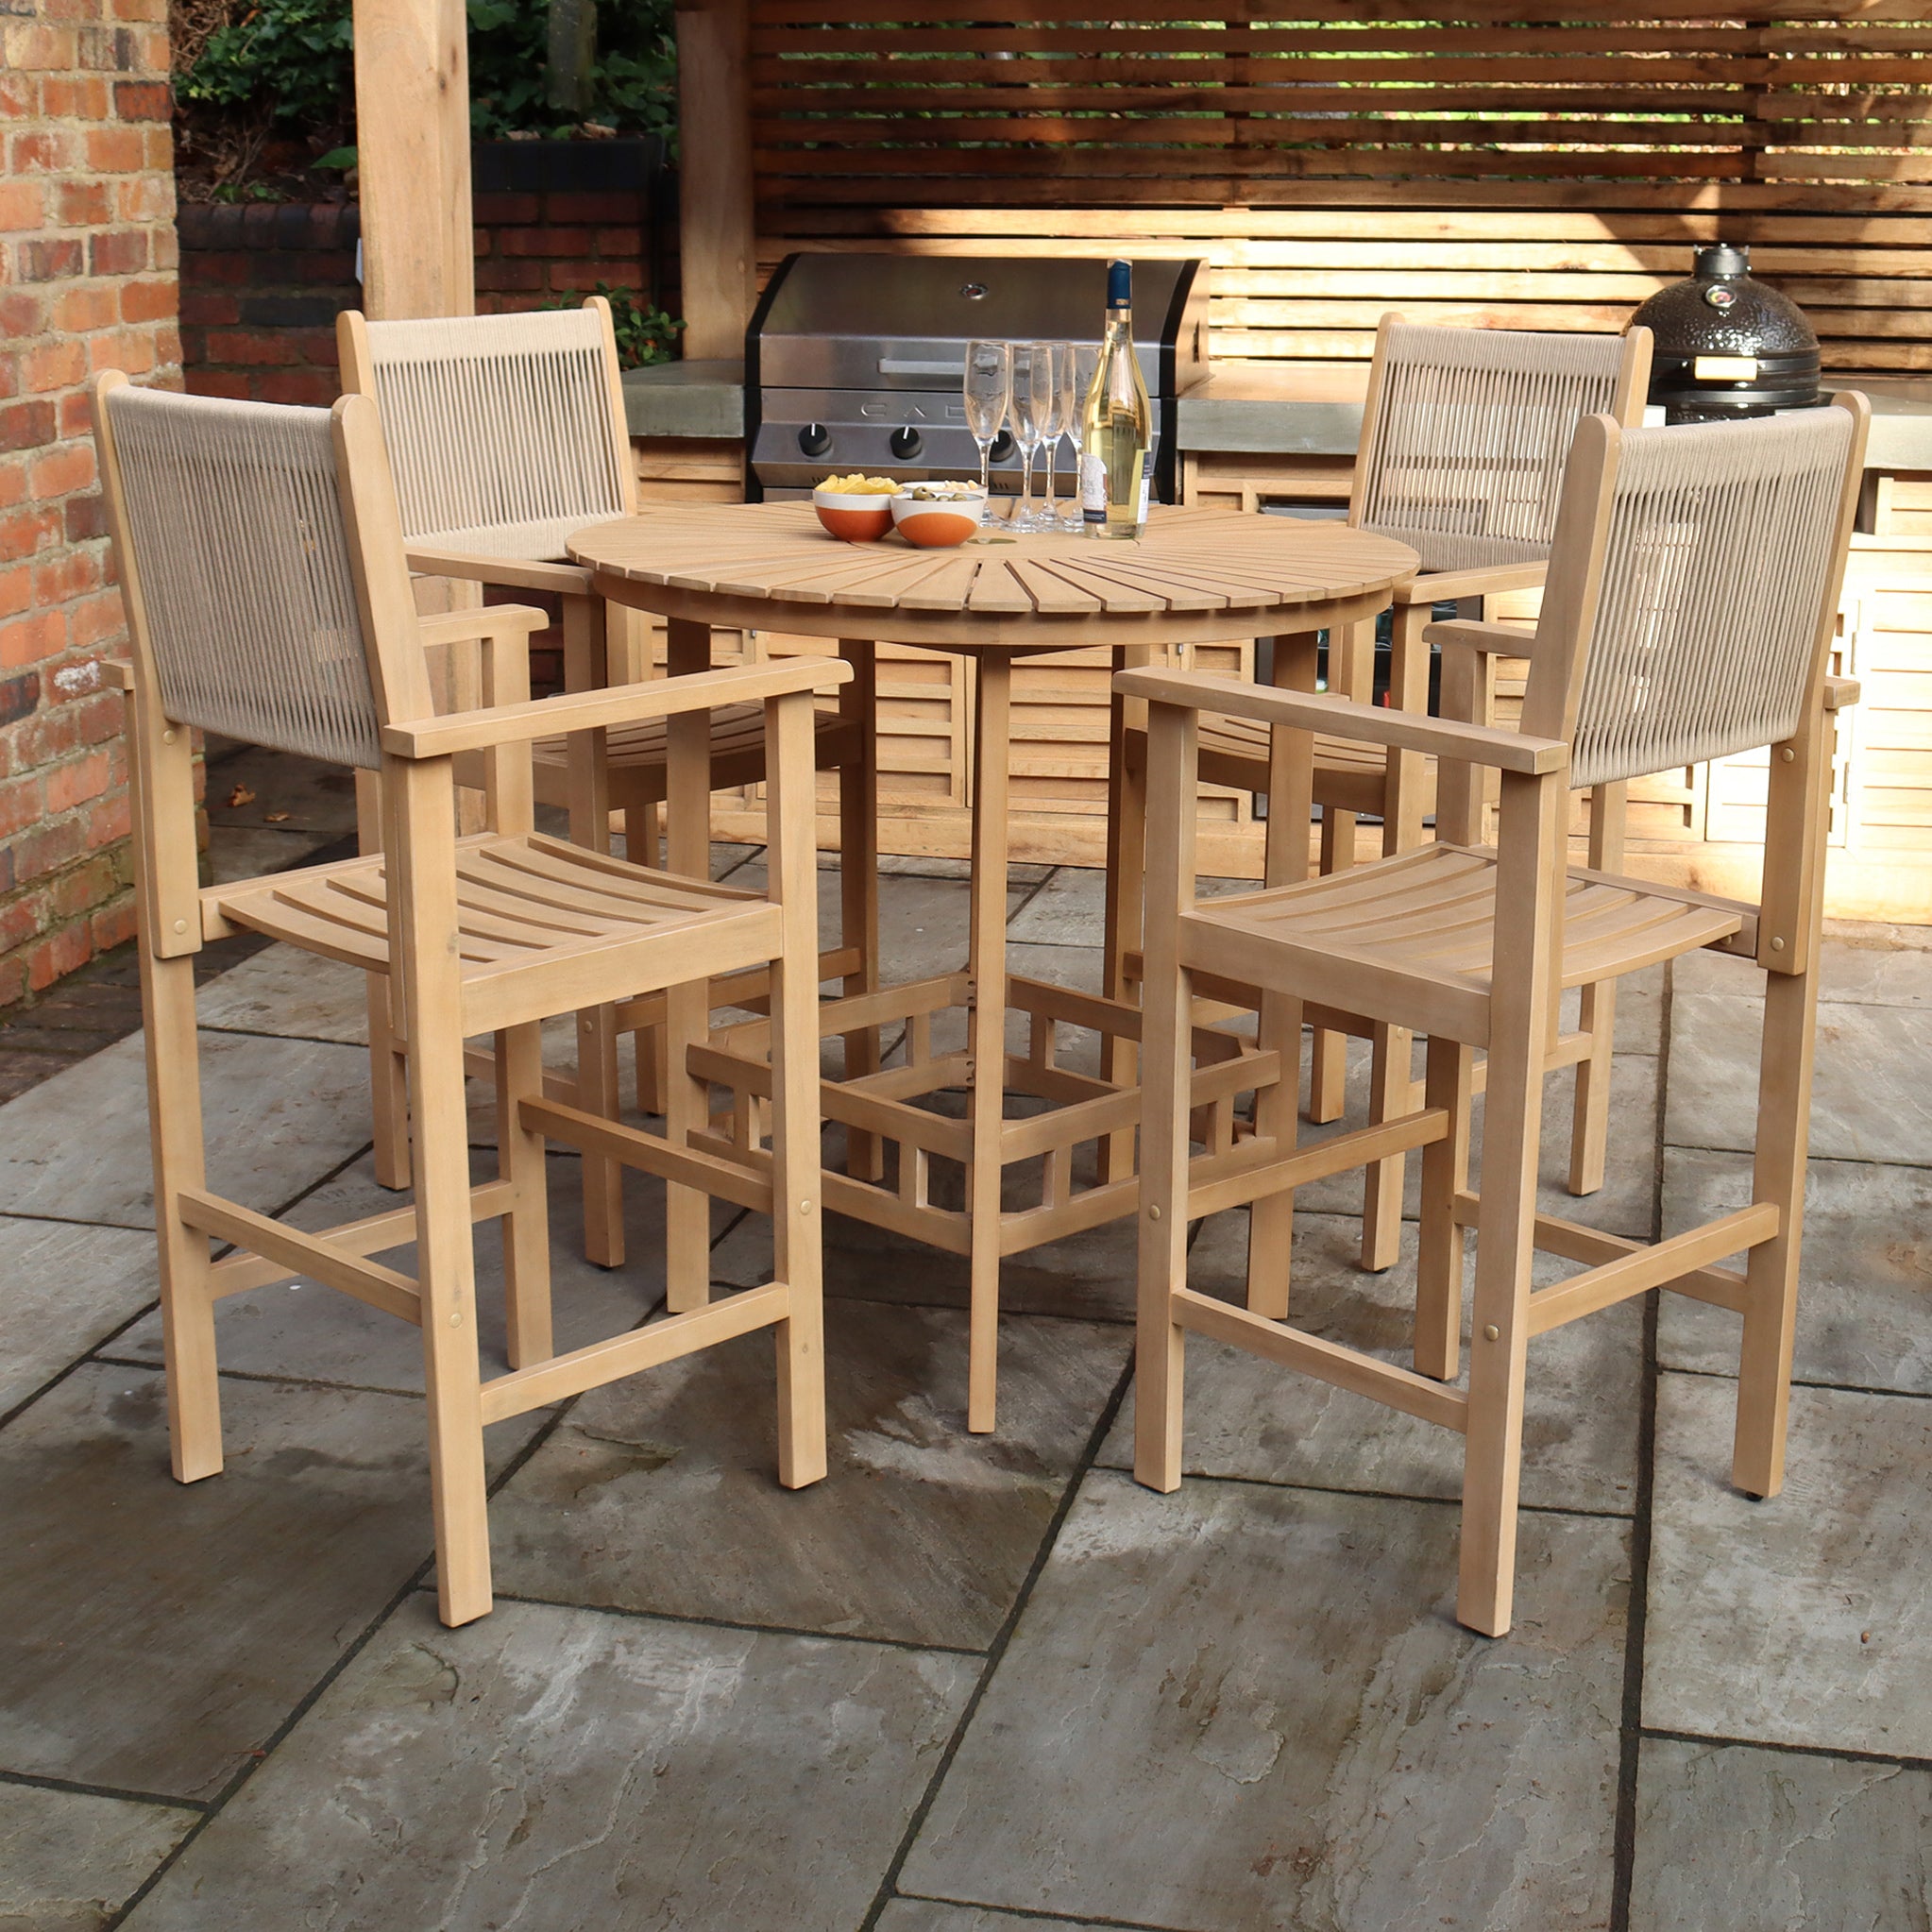 Roma Fsc Bar Set 100cm High Table With 4 Rope Bar Stools Roseland